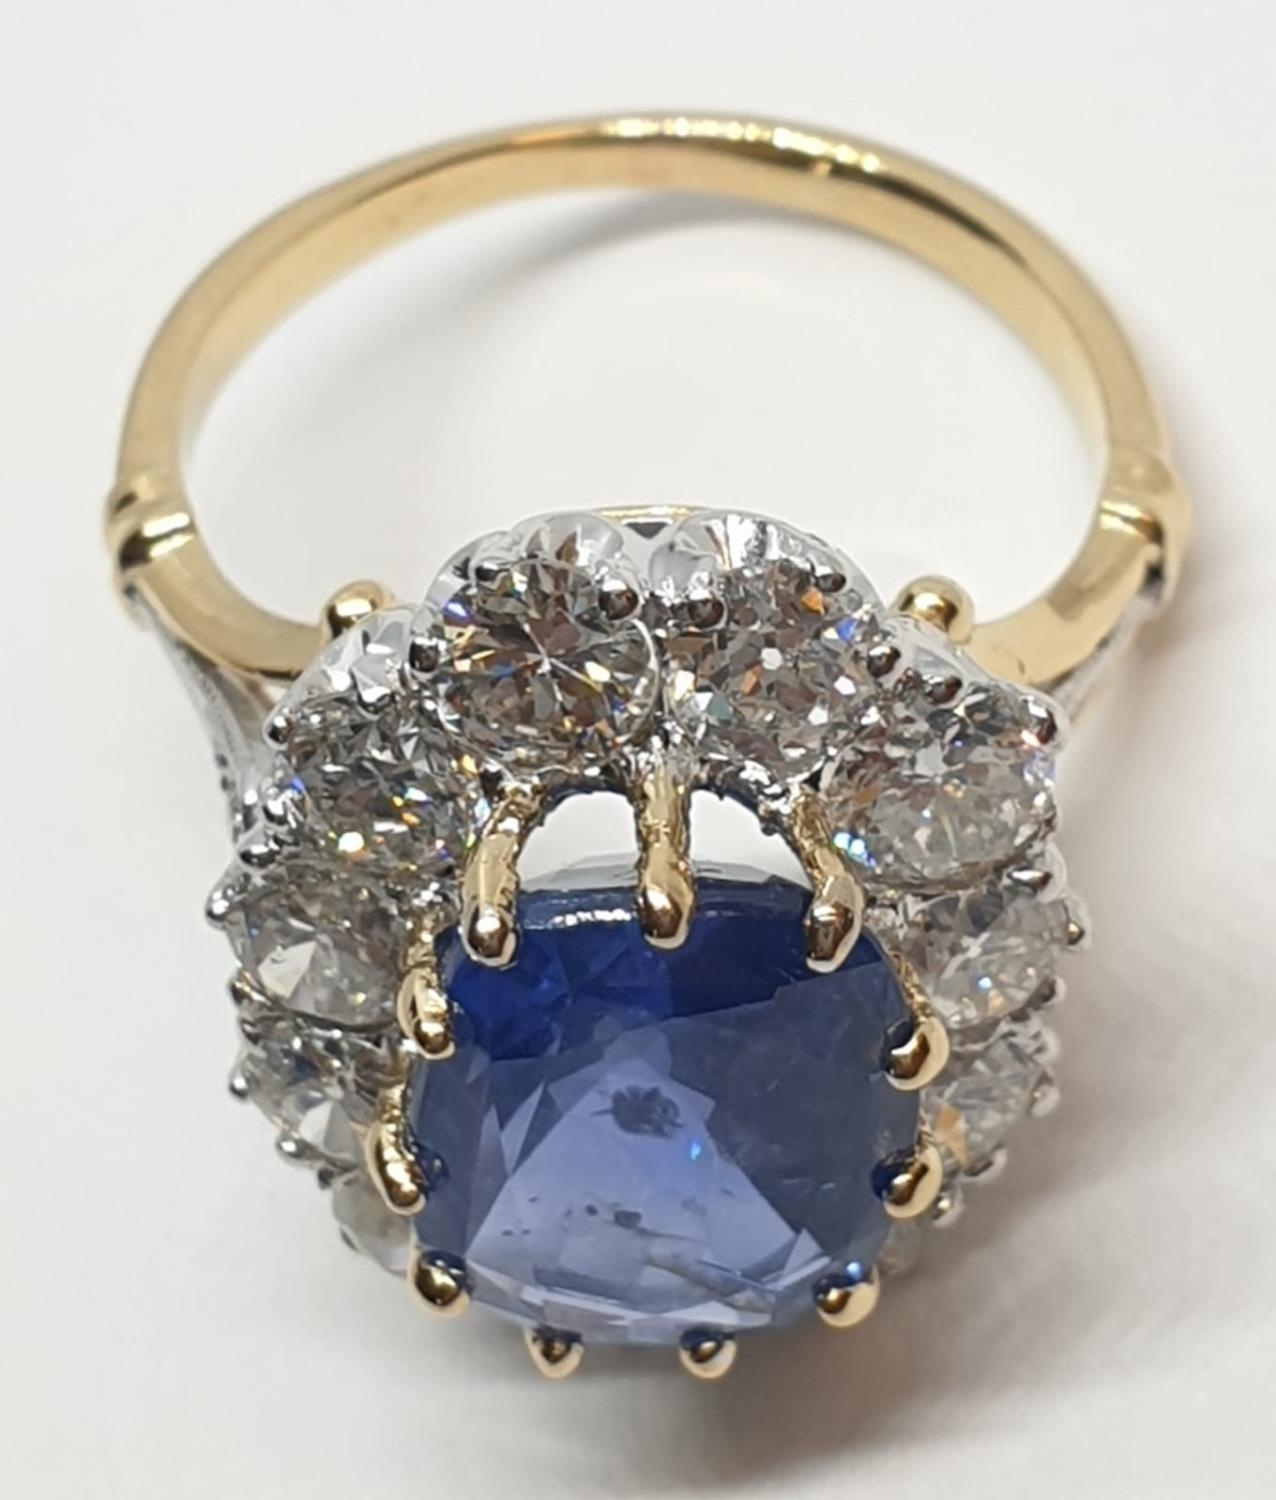 5.75ct sapphire ring set in white and yellow gold with over 3.5ct diamonds surrounding, weight 6. - Image 6 of 12